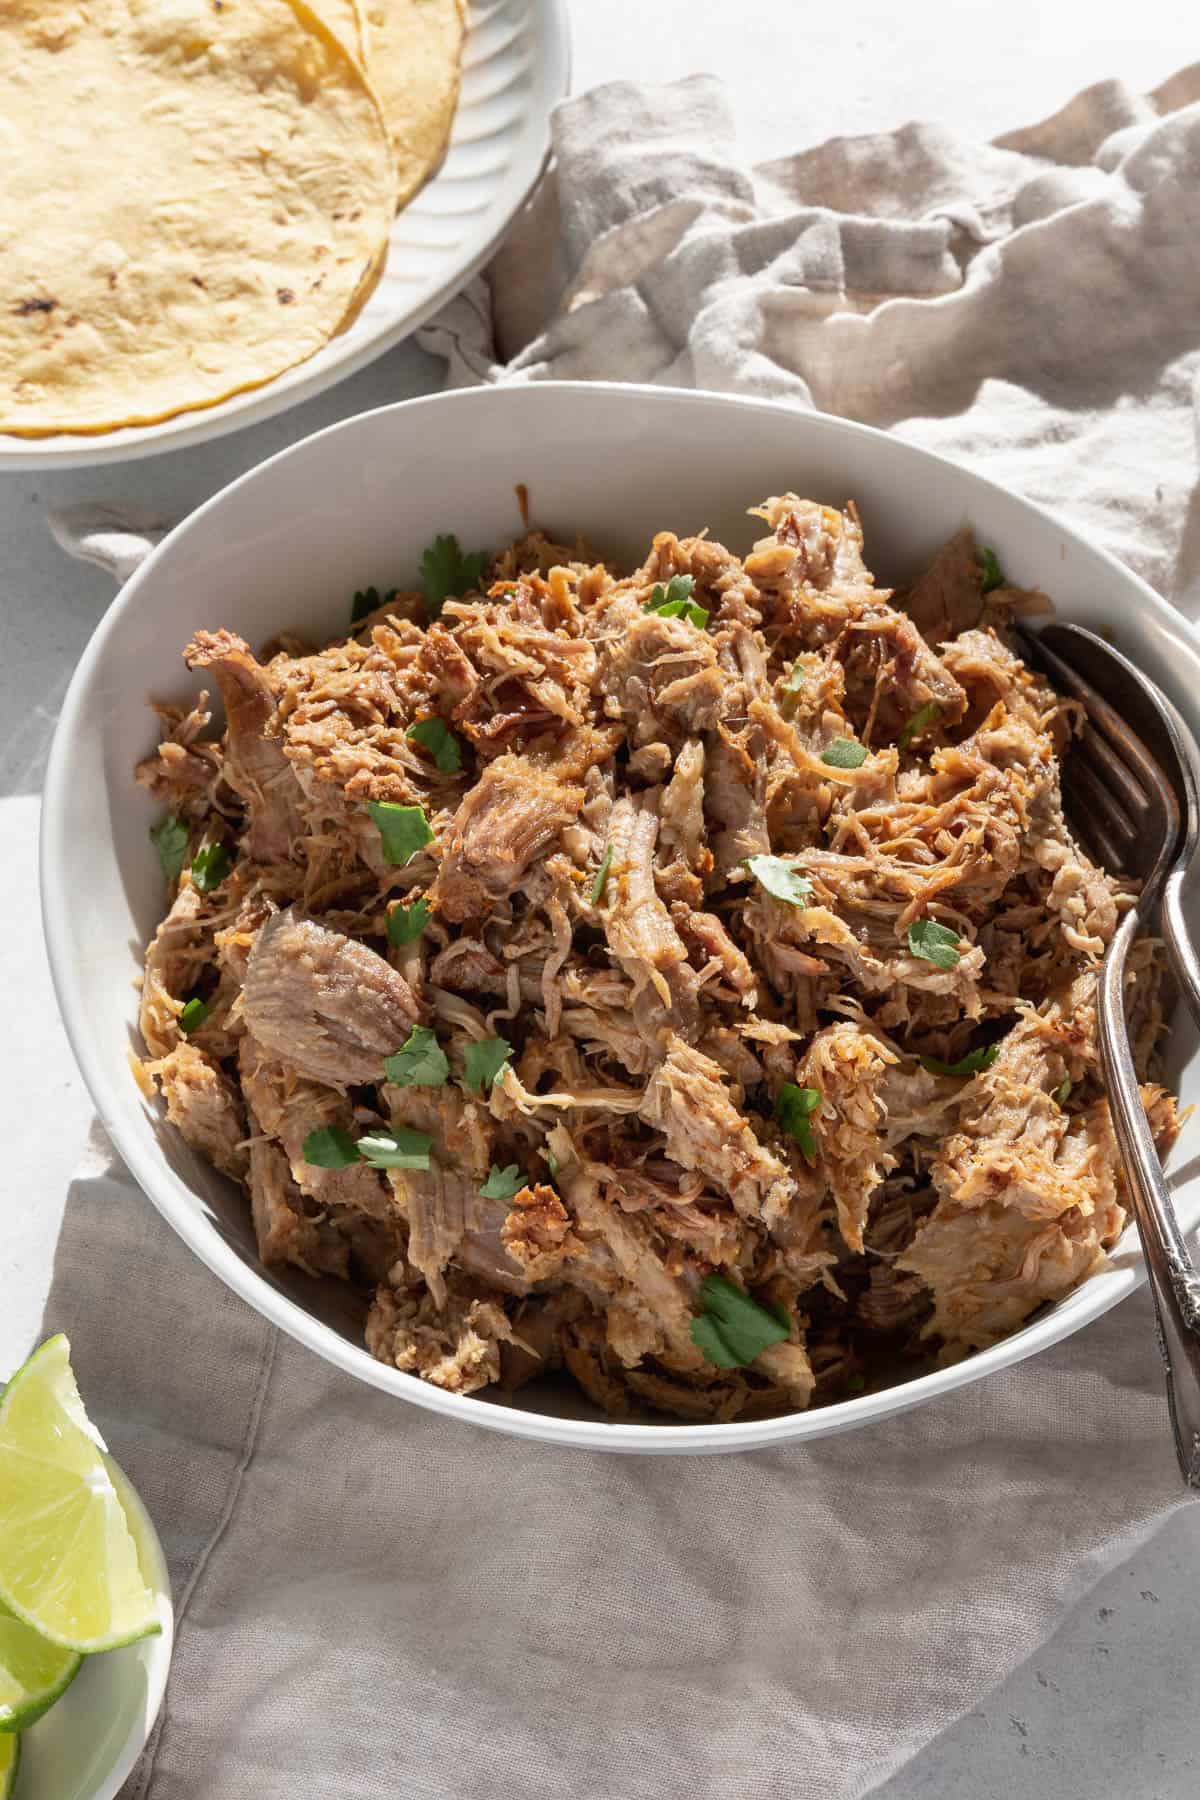 A serving bowl of the pork carnitas with herbs, silverware, and tortillas.